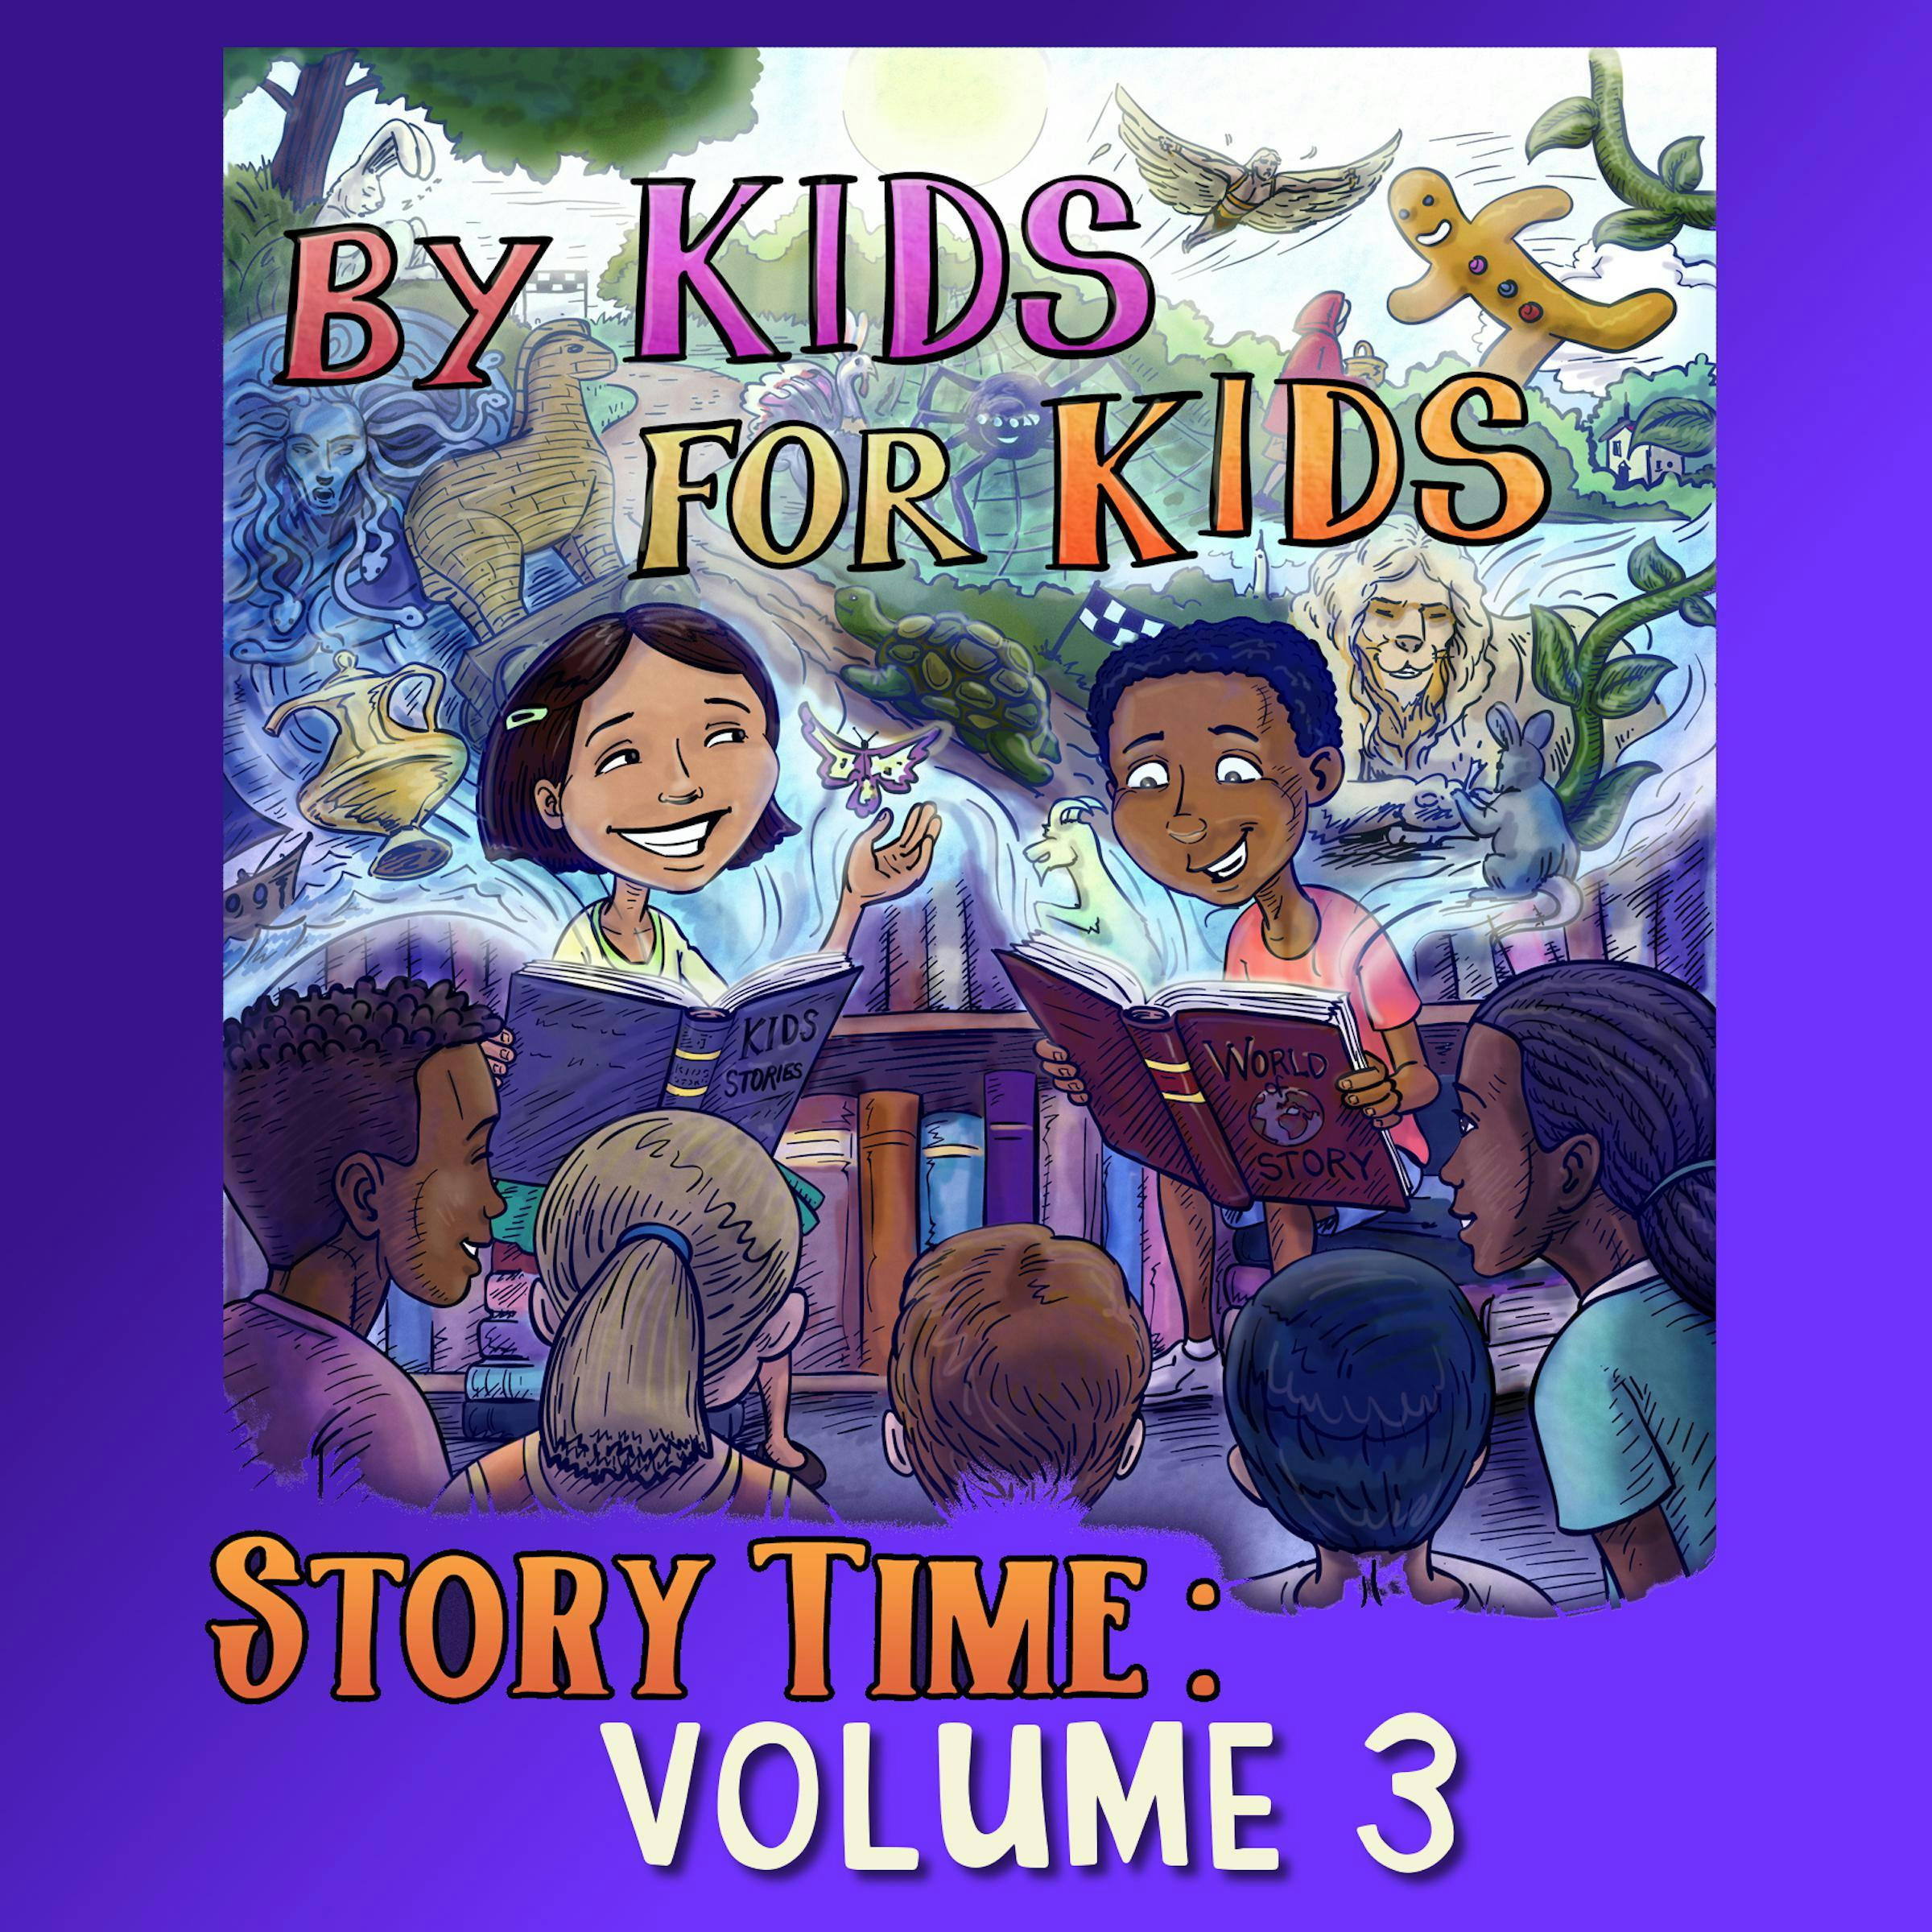 By Kids For Kids Story Time: Volume 03 - By Kids For Kids Story Time